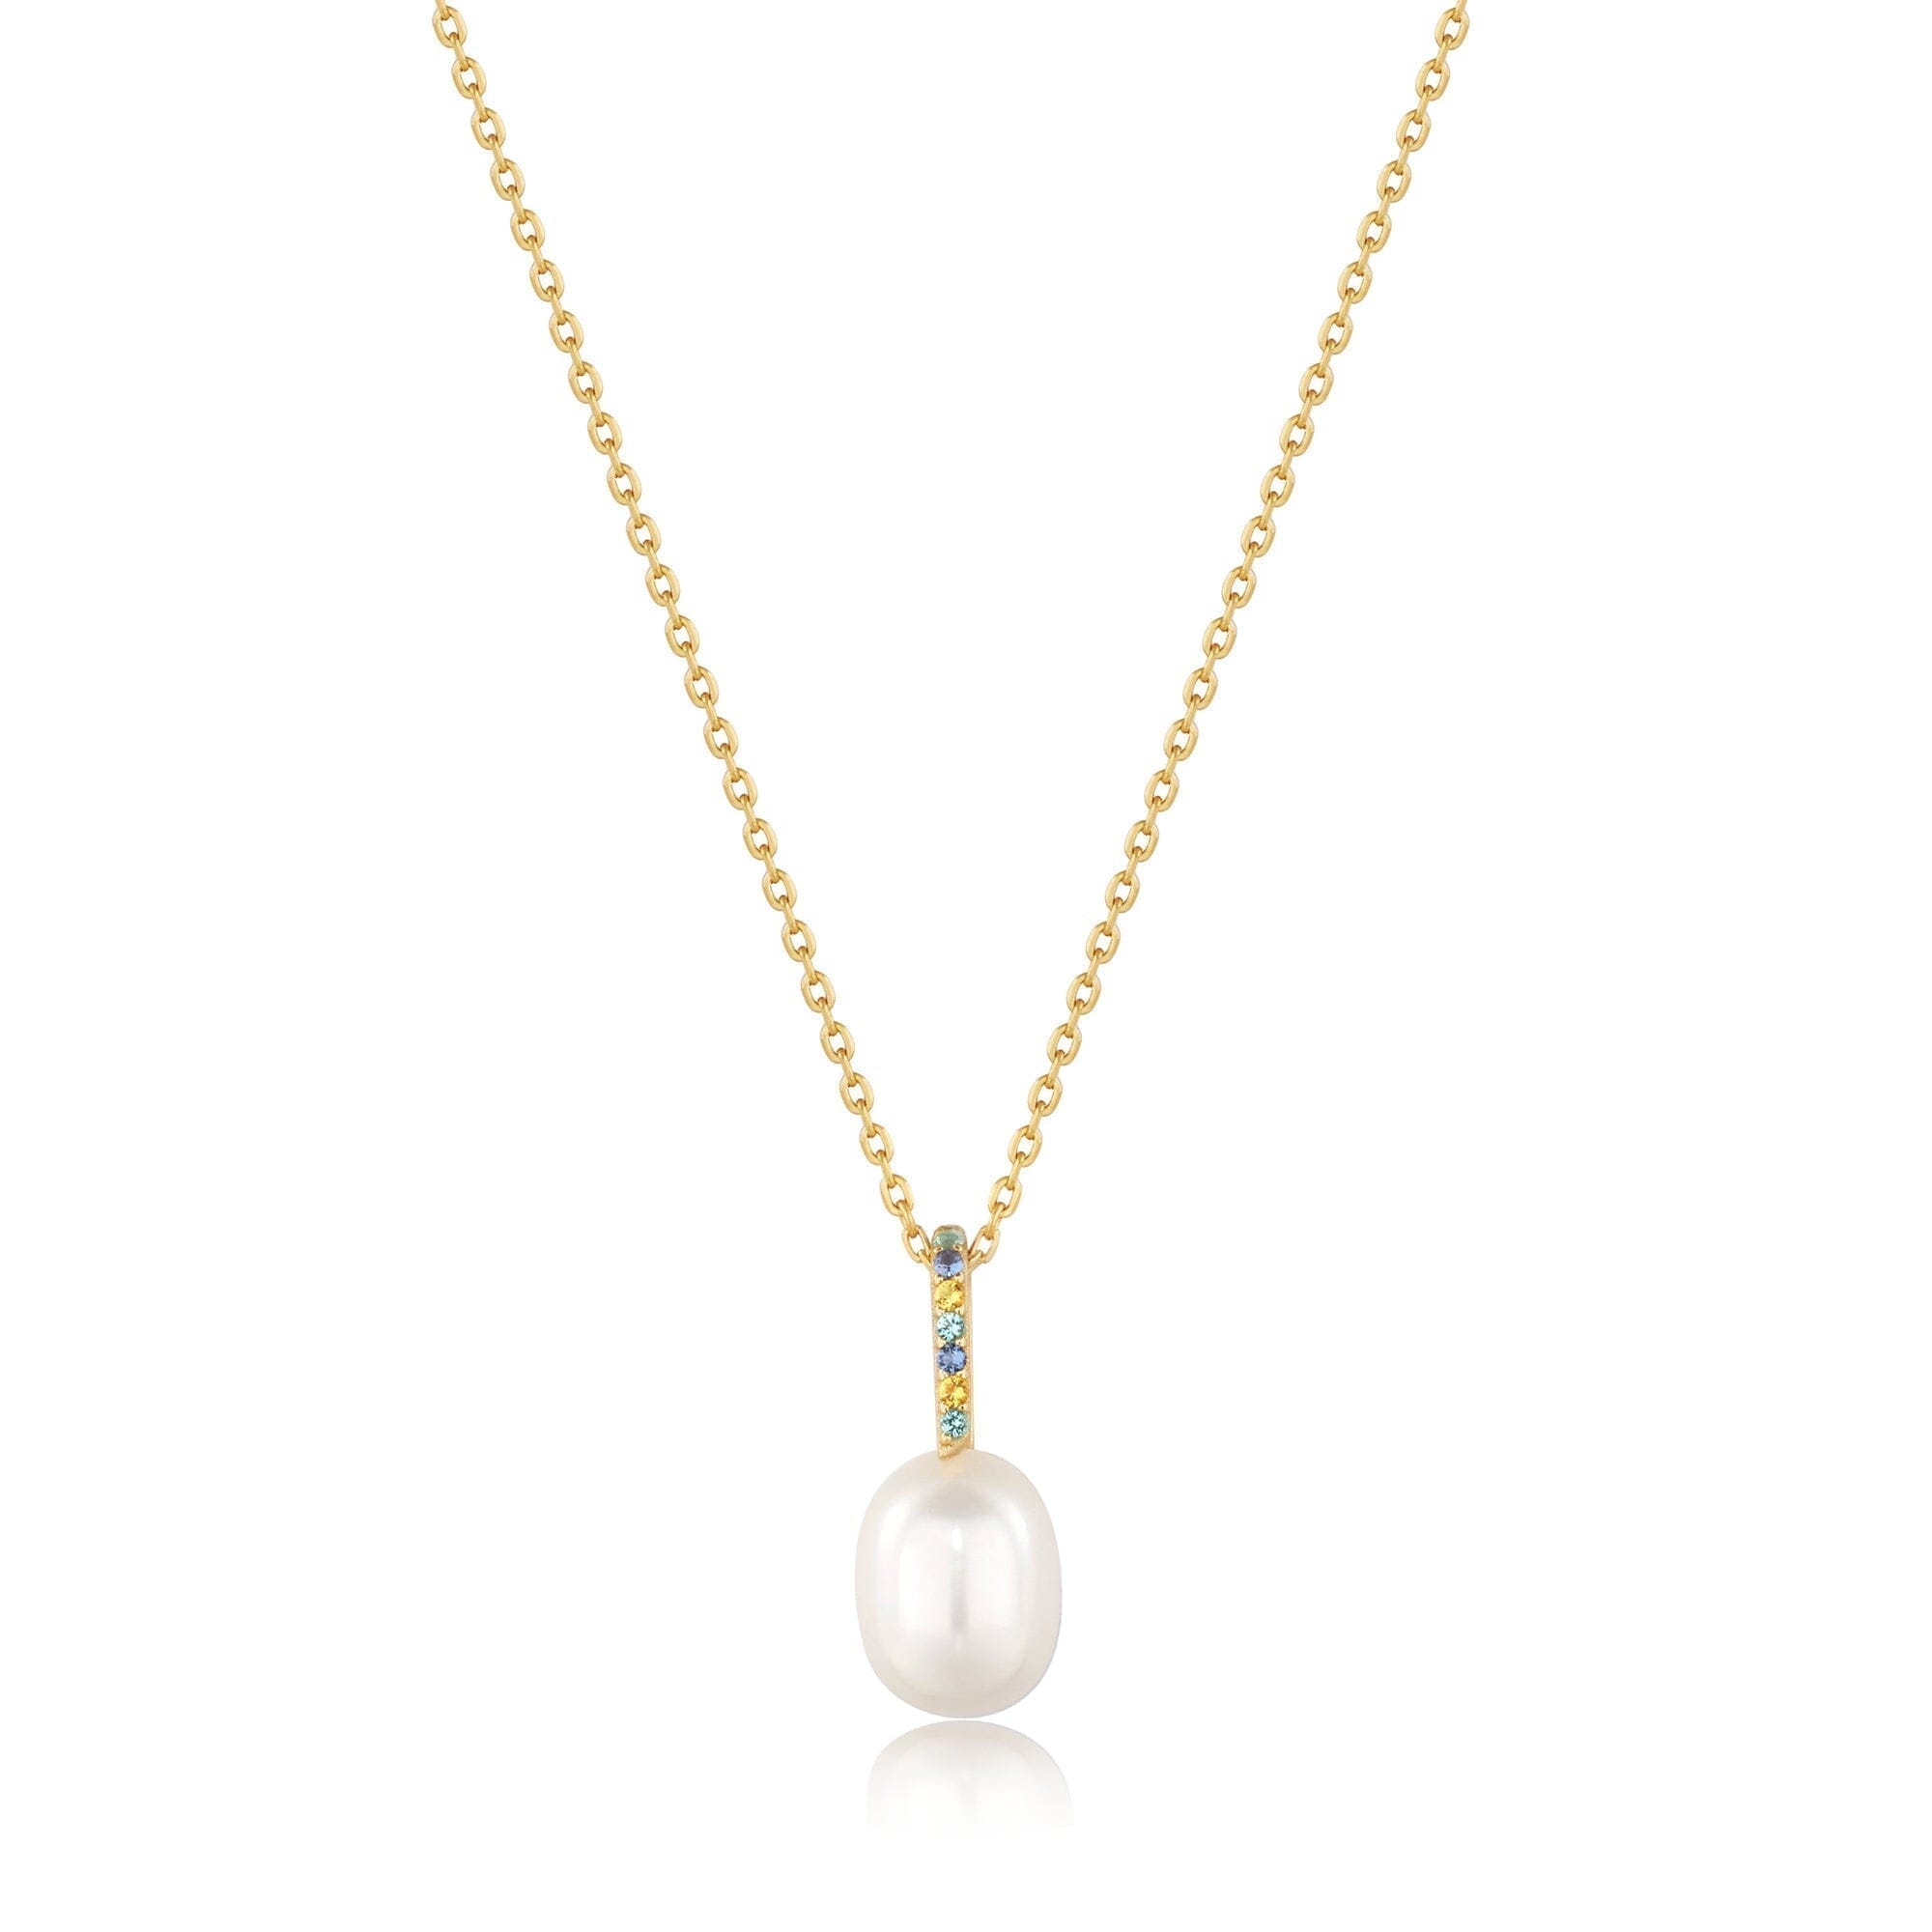 Ania Haie Gold Gem Pearl Drop Pendant Necklaces Necklaces Ania Haie 